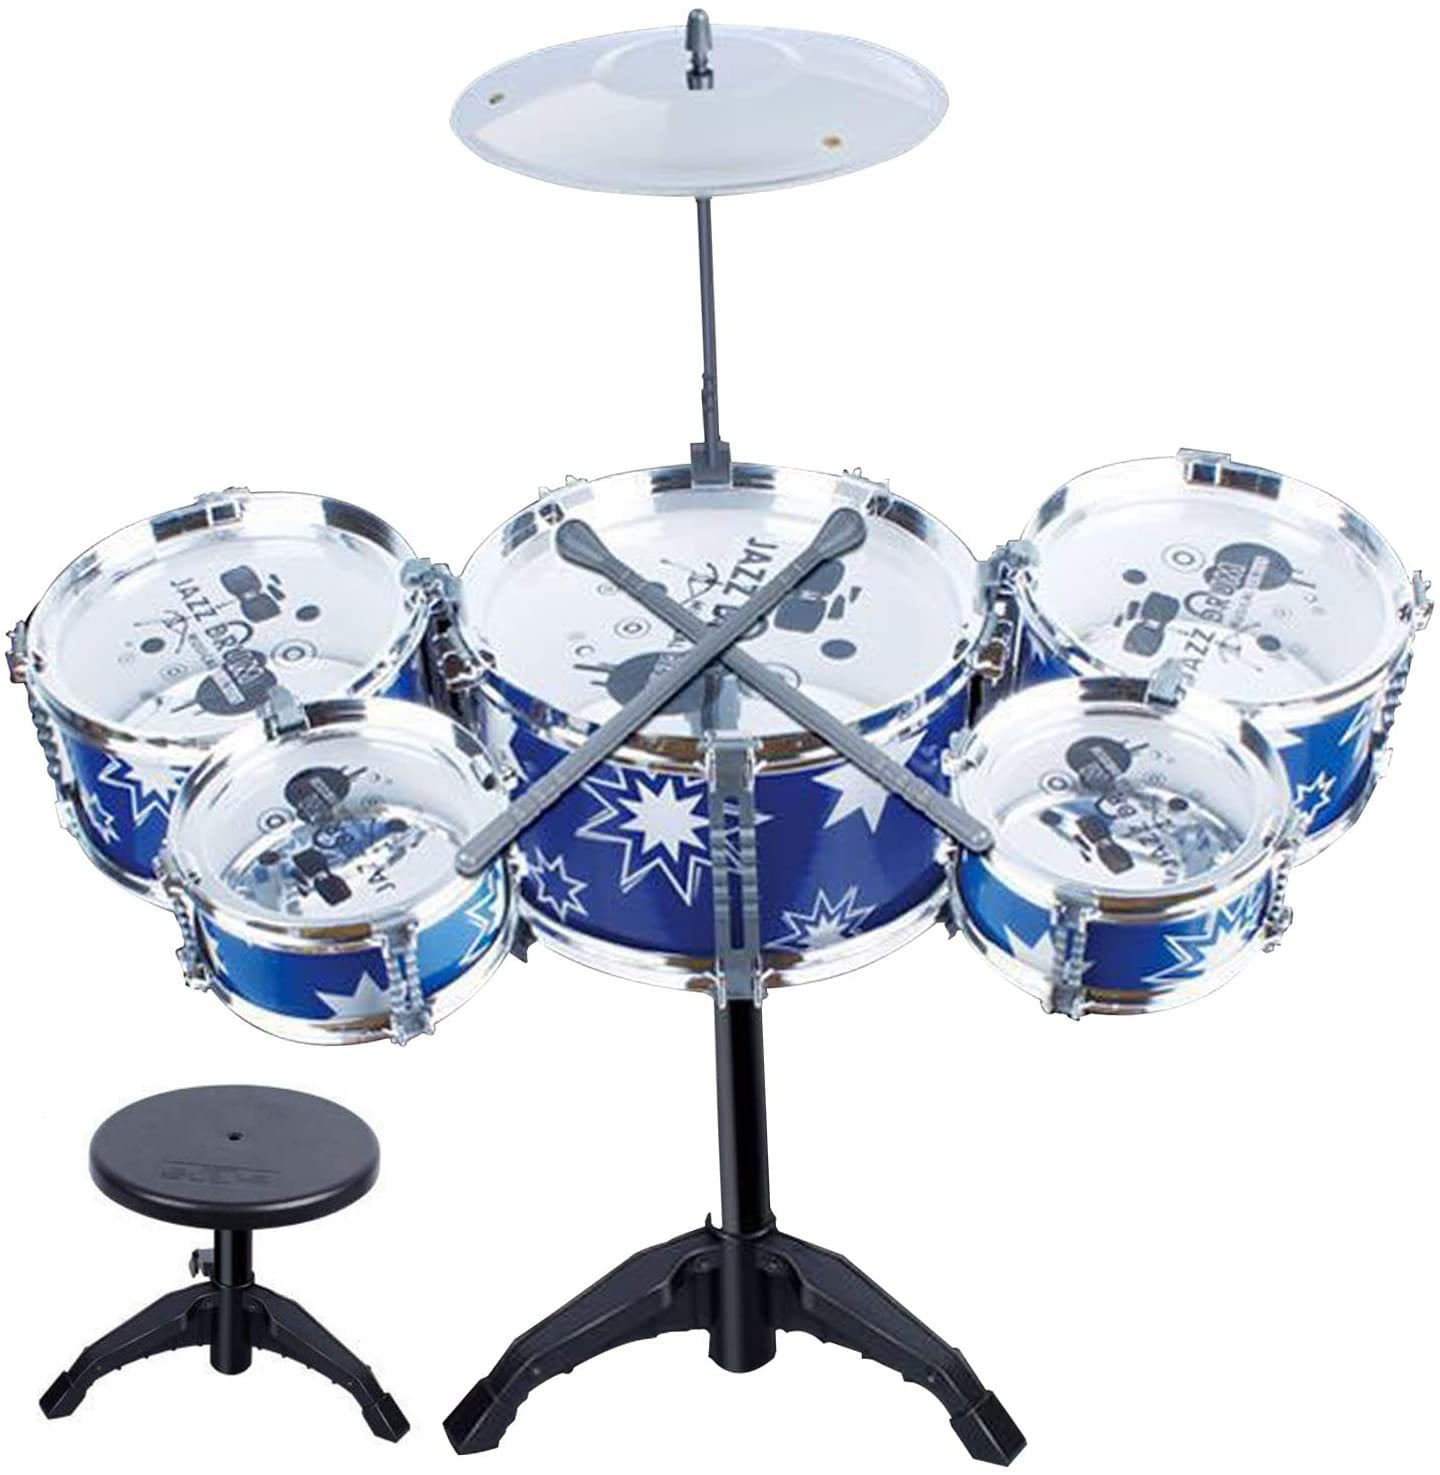 Blue Childs Kids Drum Kit Jazz Band Sound Drums Play Set Musical Toy With Stool 